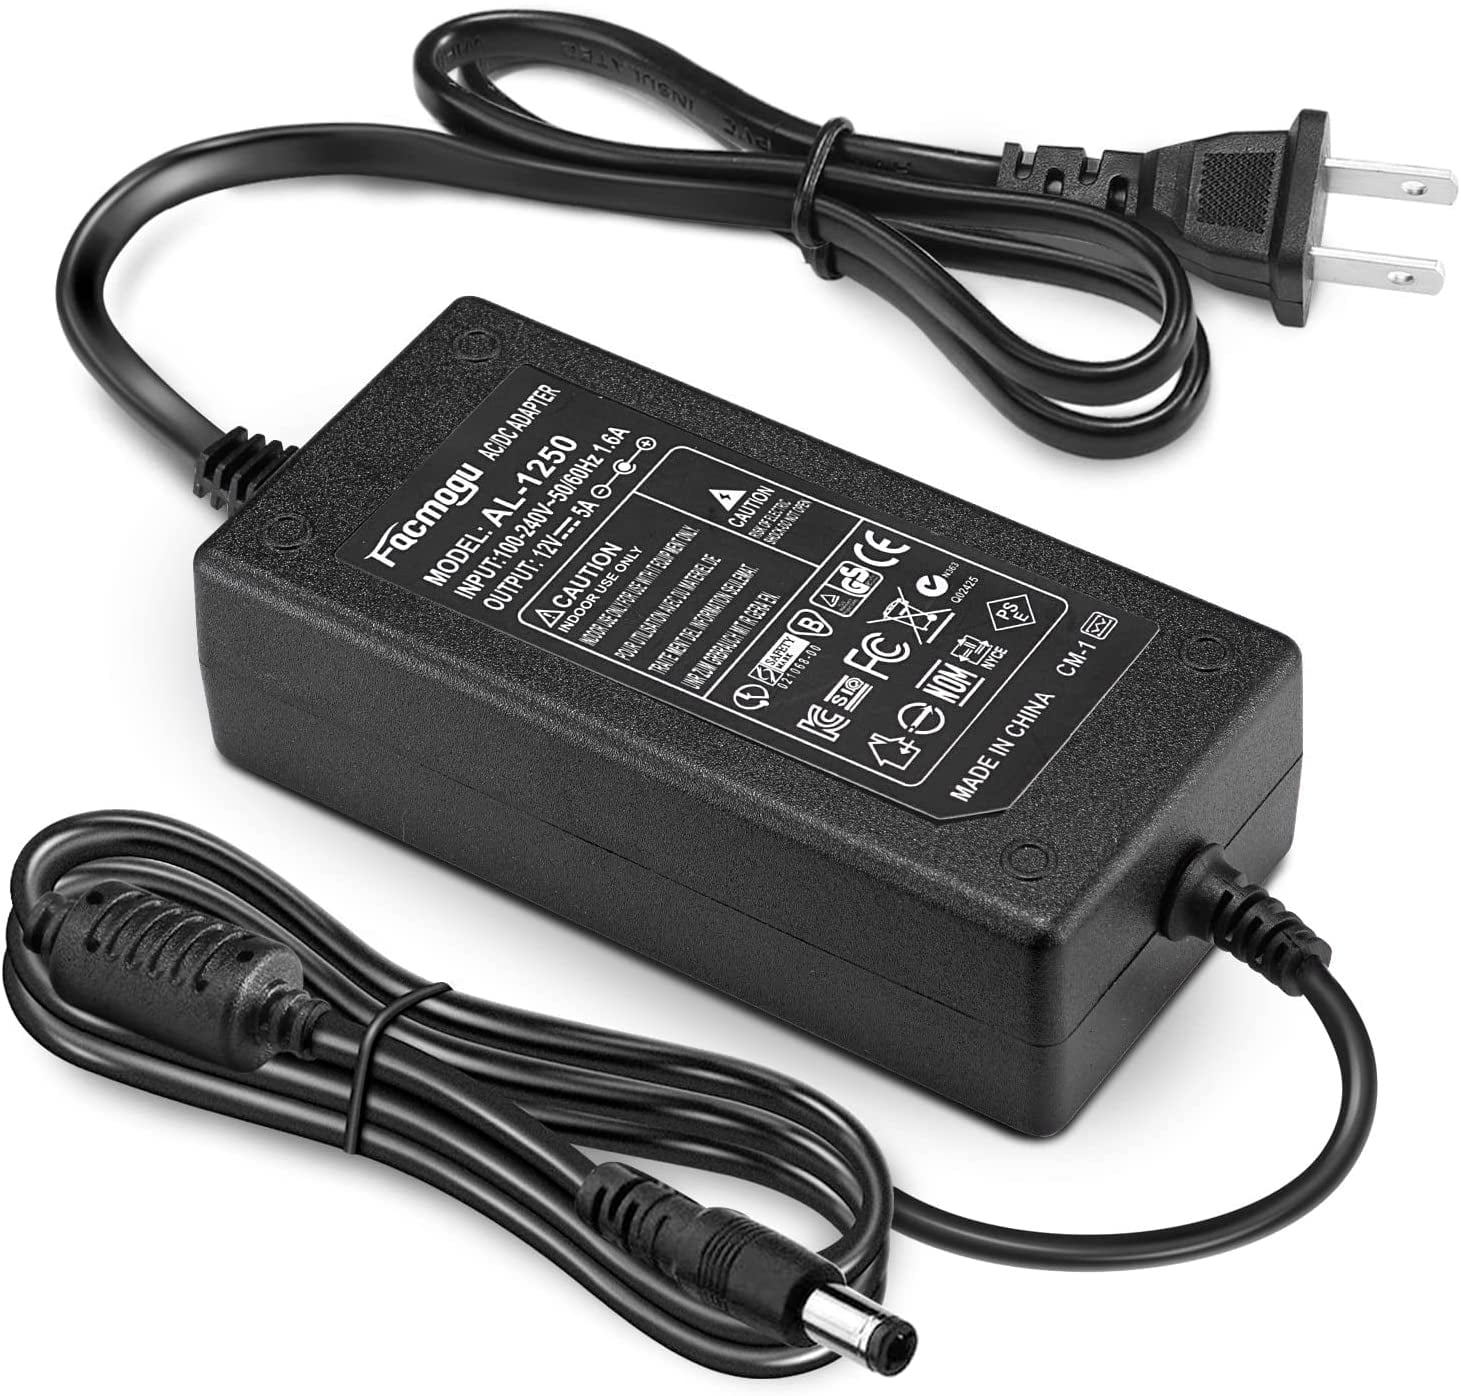 Facmogu 60W 12V 5A AC/DC Power Adapter, AC to DC 12V 5A Power Suppy, 12  Volts 5 Amps AC DC Table Top Adapter, 60 Watts 12V 5A Switching Power  Adaptor Converter, 5.5x2.5mm